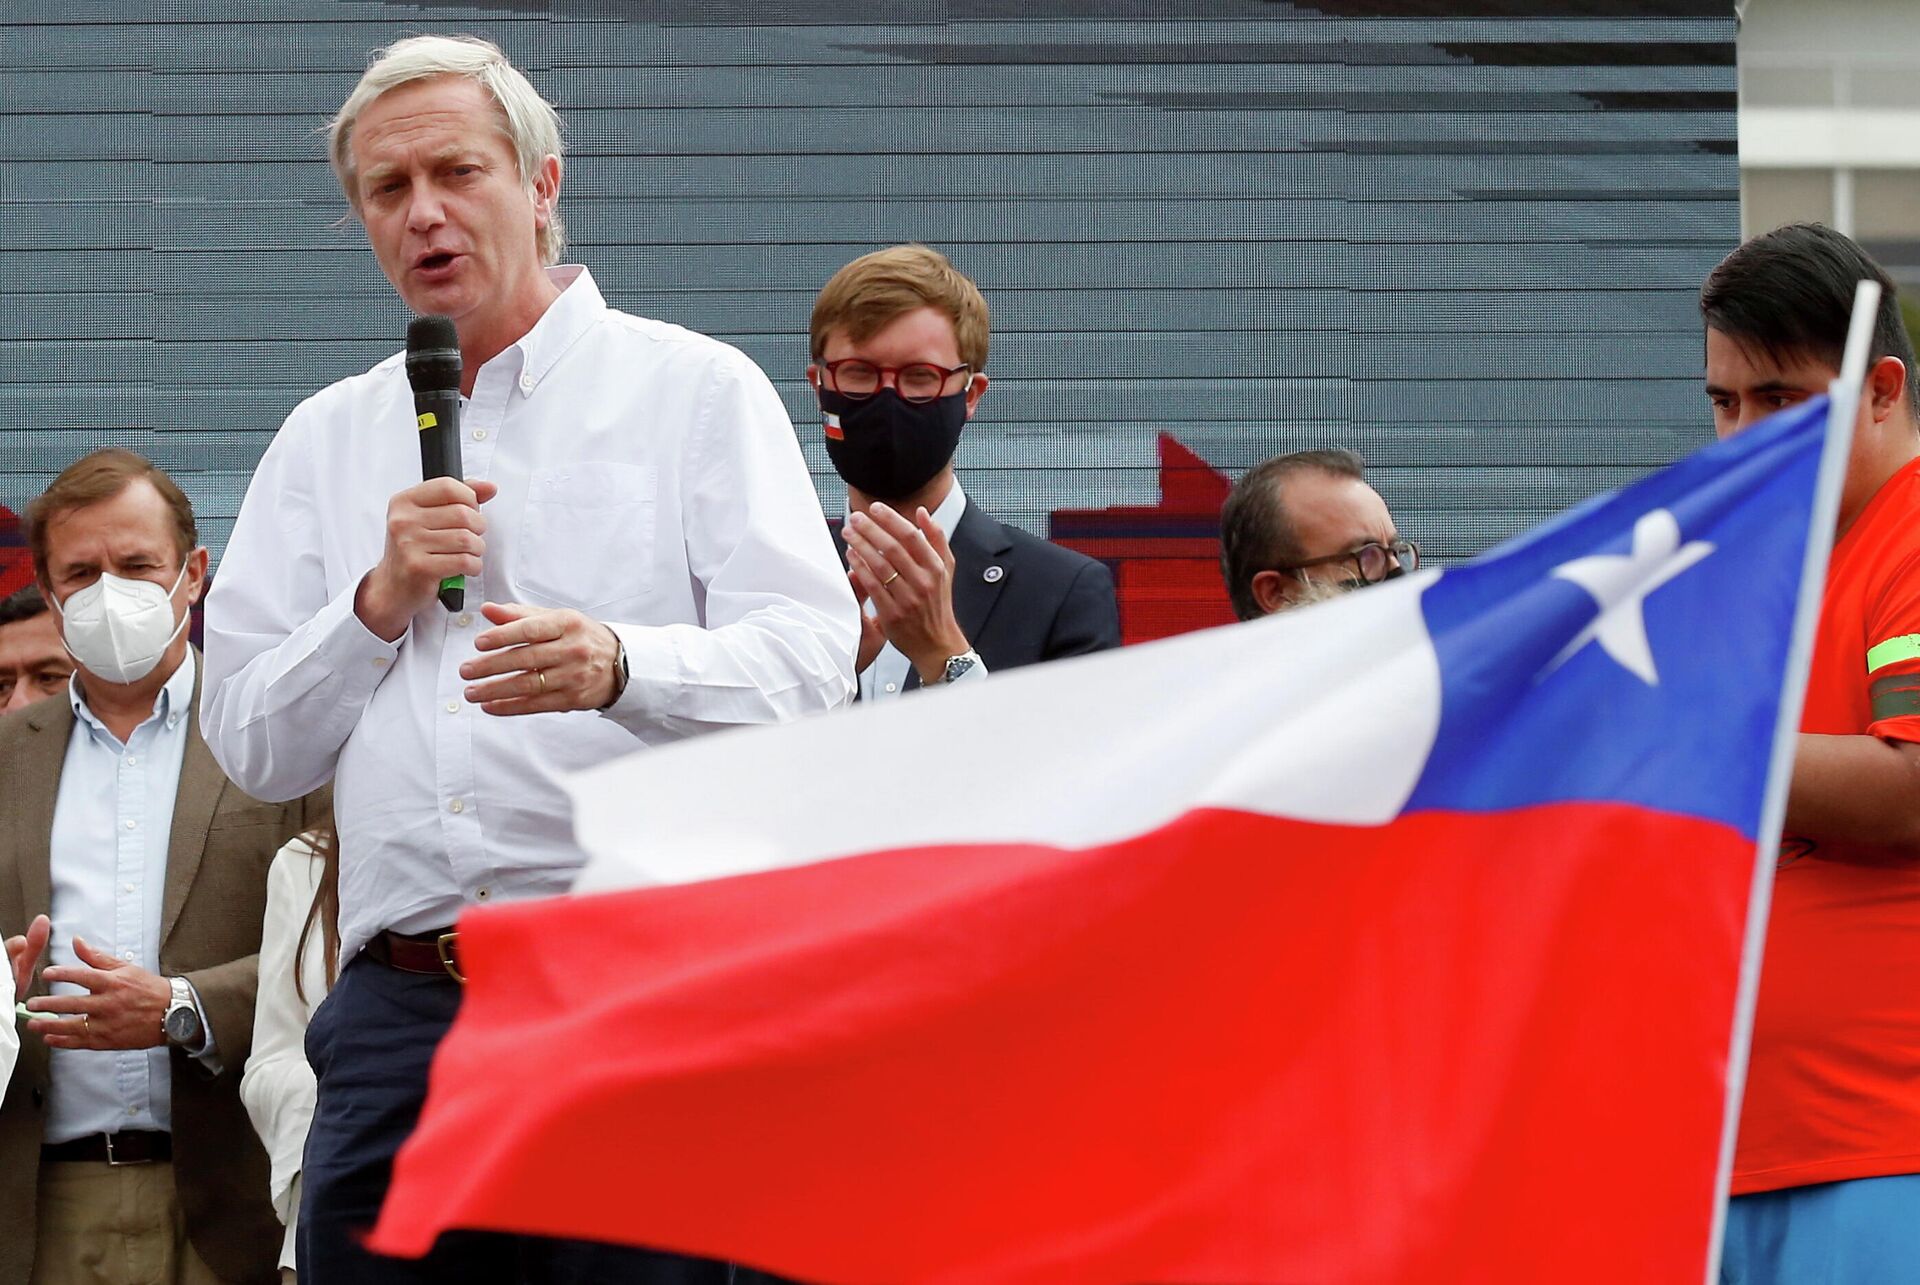 Chilean presidential candidate Jose Antonio Kast from the far-right Republican Party meets with his supporters during a campaign rally, ahead of the December 19 second round presidential elections, in Vina del Mar, Chile, December 6, 2021. - Sputnik International, 1920, 15.12.2021